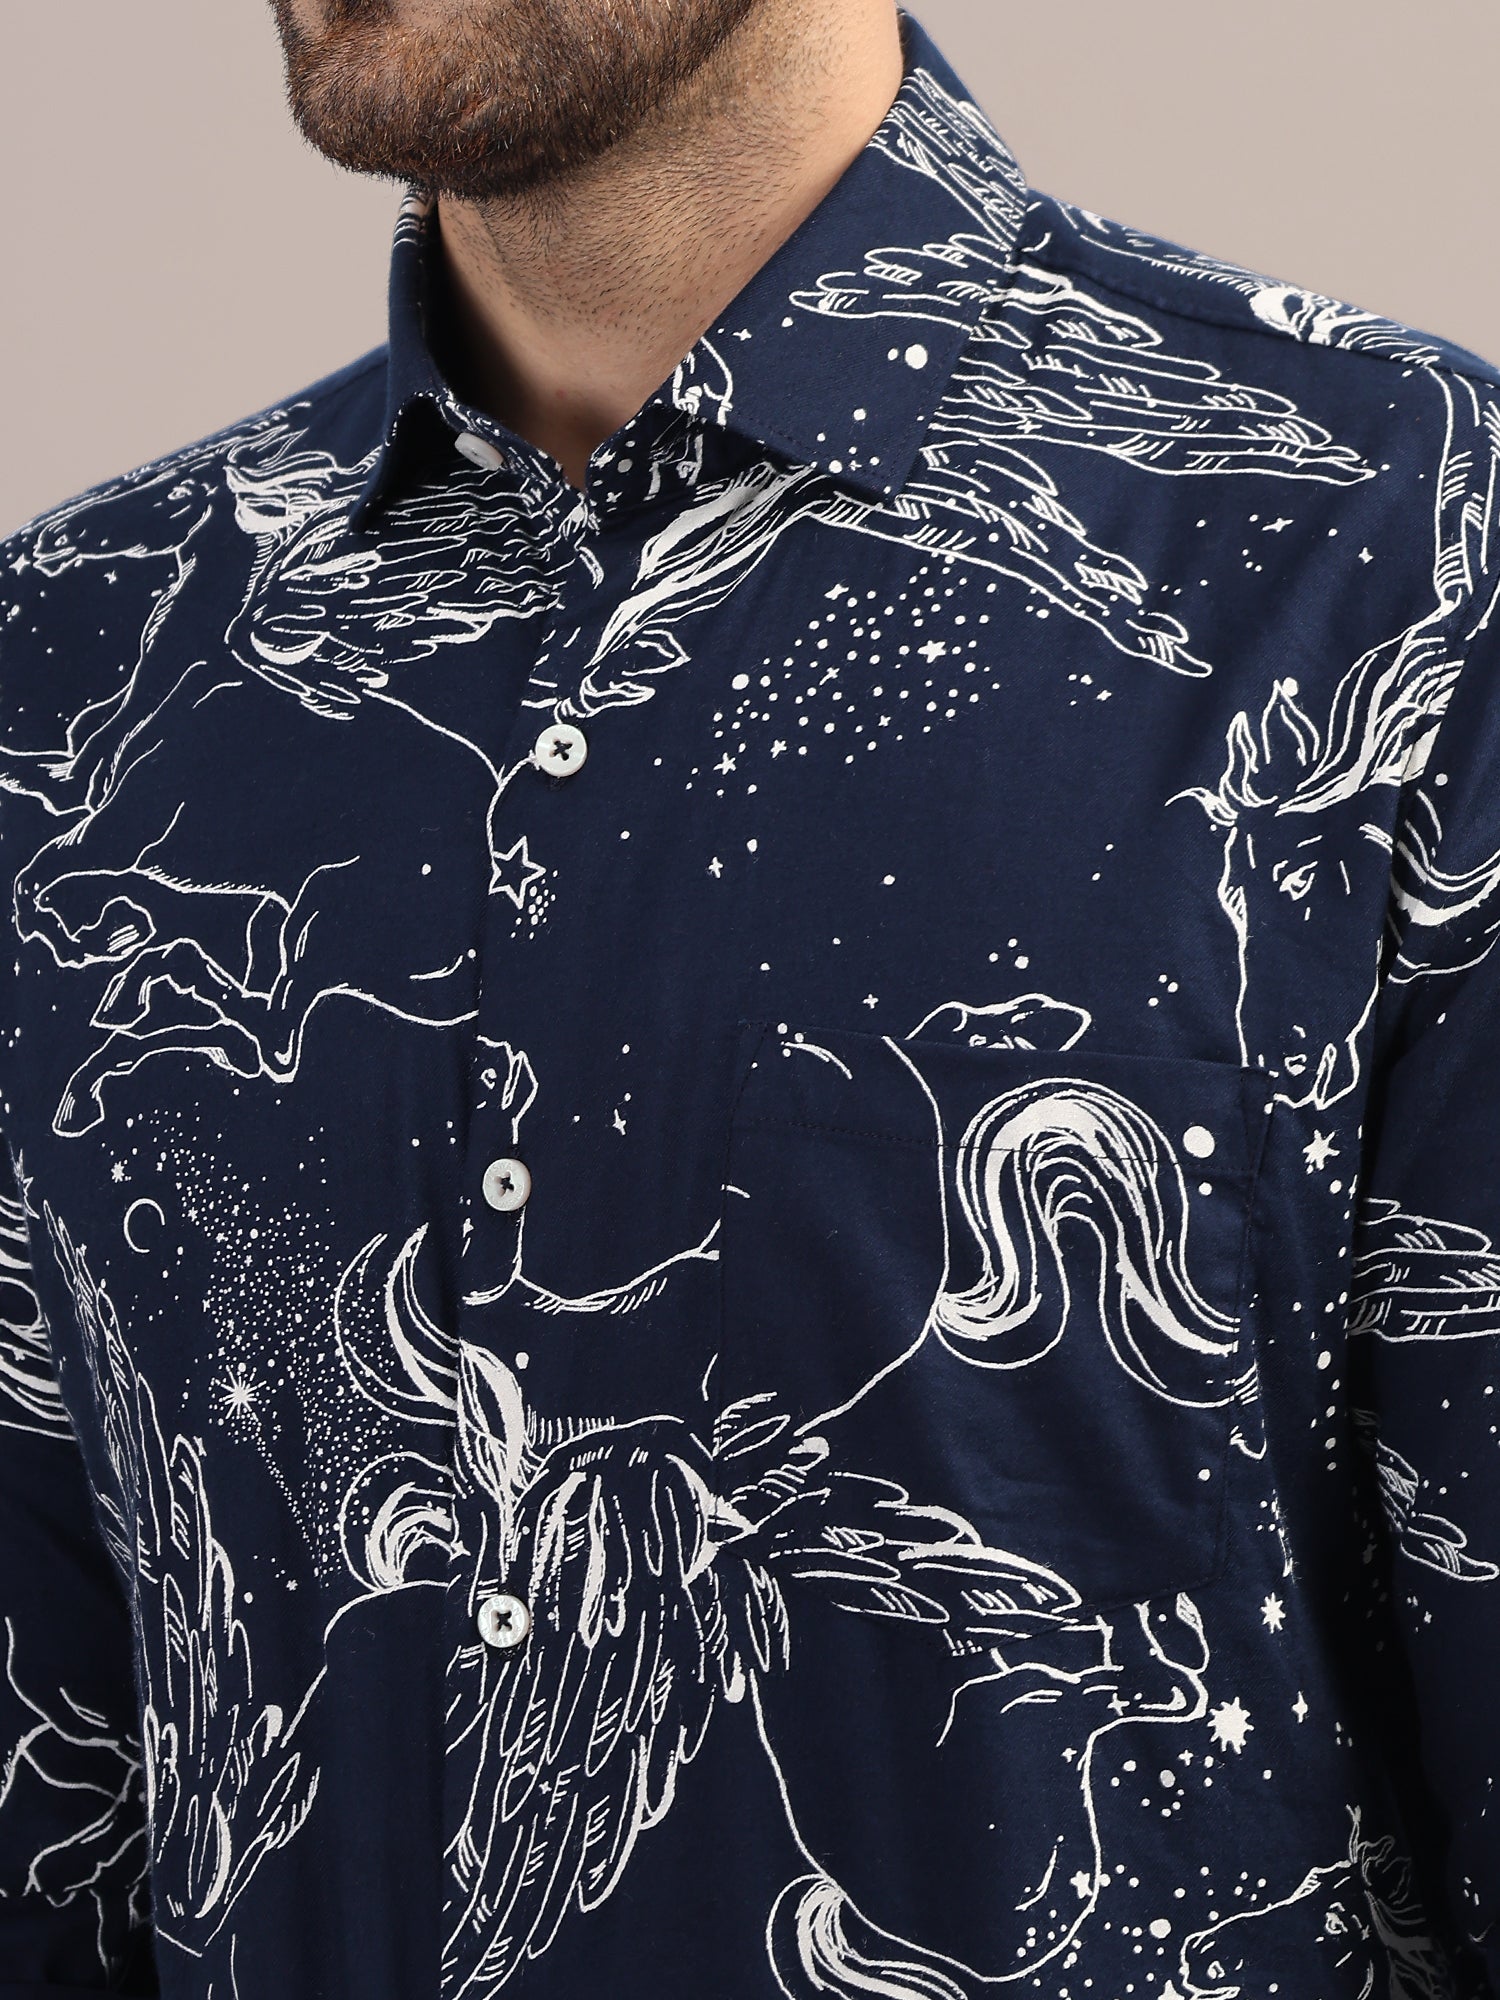 Amswan Premium Shirt With Spread Collar In Smart Fit And Printed Design For Men's